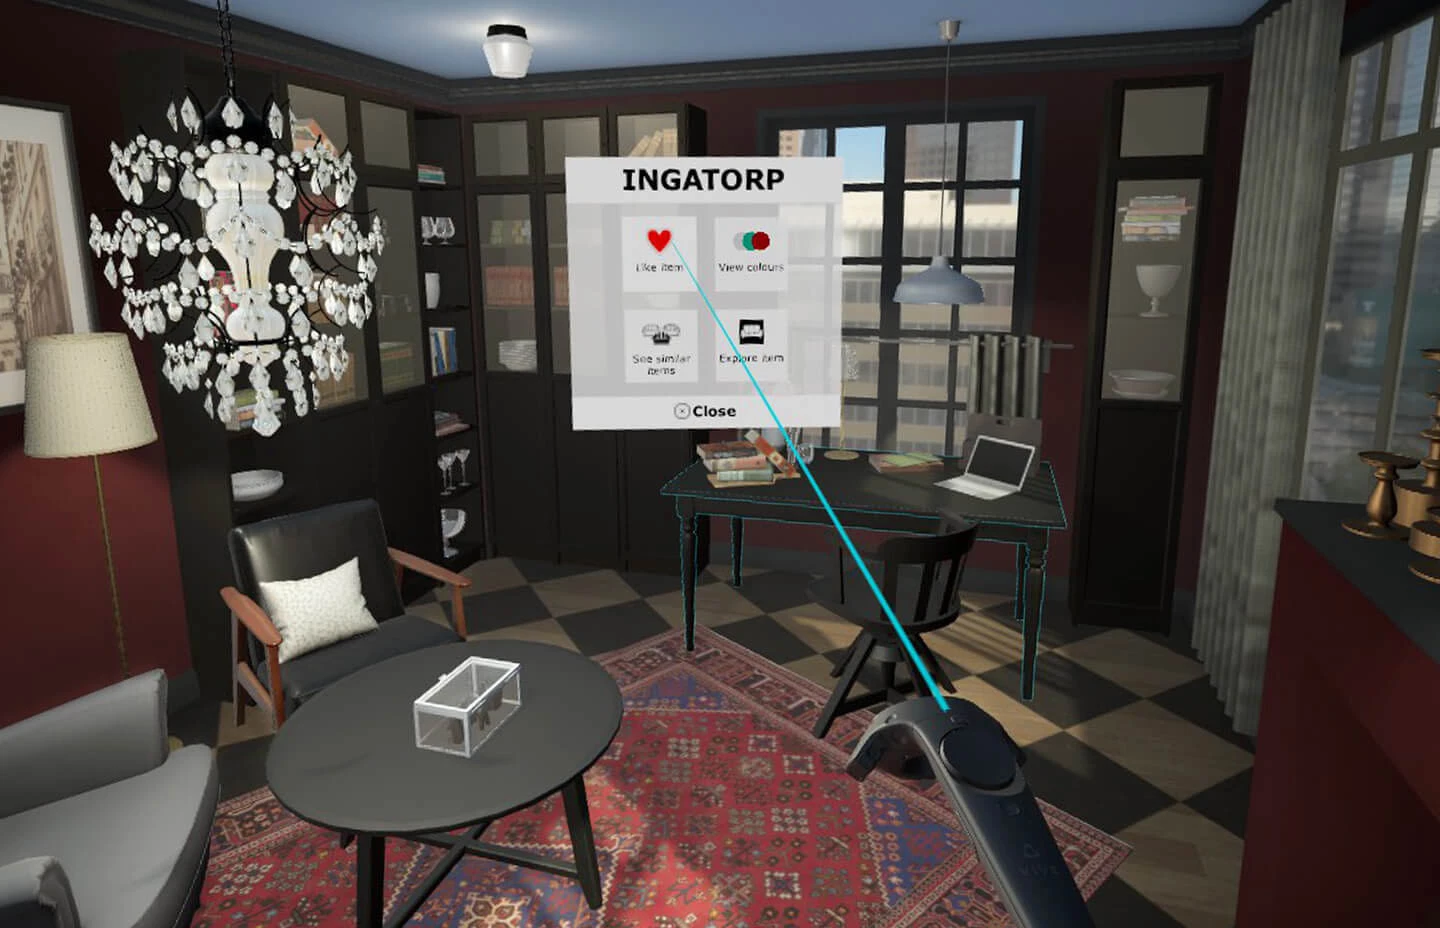 Virtual environment with controller pointing at a virtual menu allowing the user to like an INGATORP product